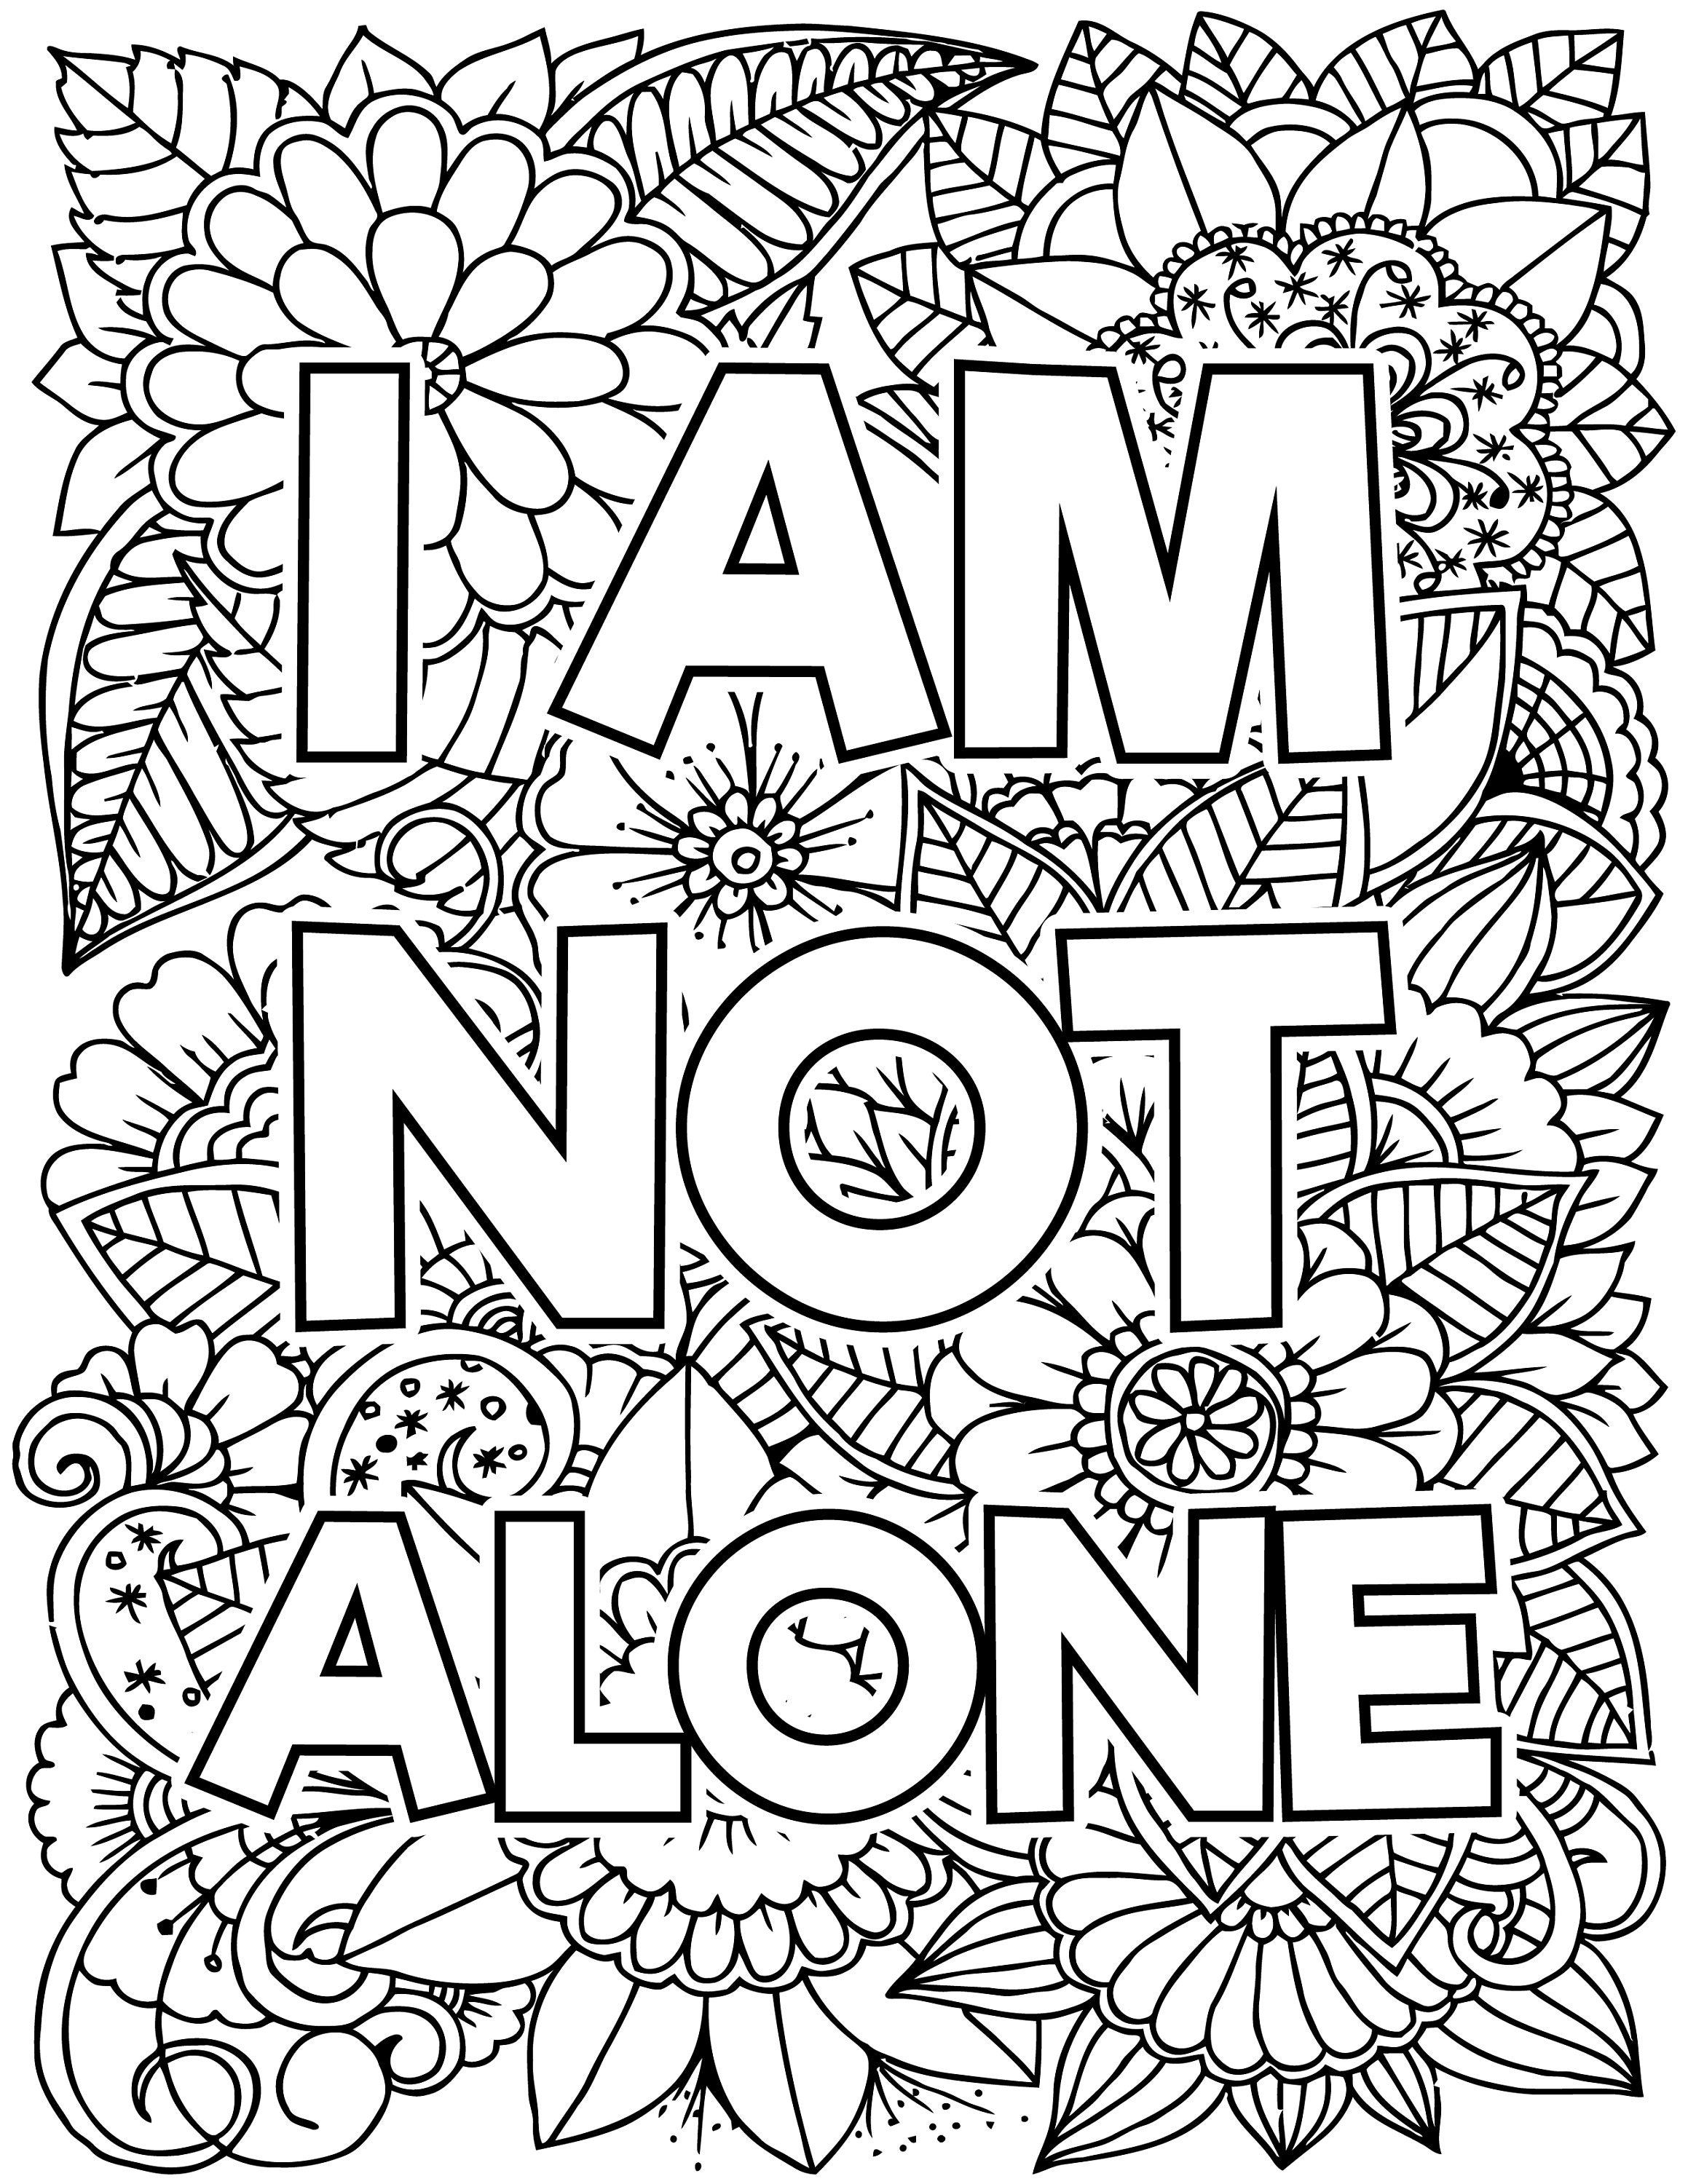 10-mental-health-affirmations-coloring-book-pages-etsy